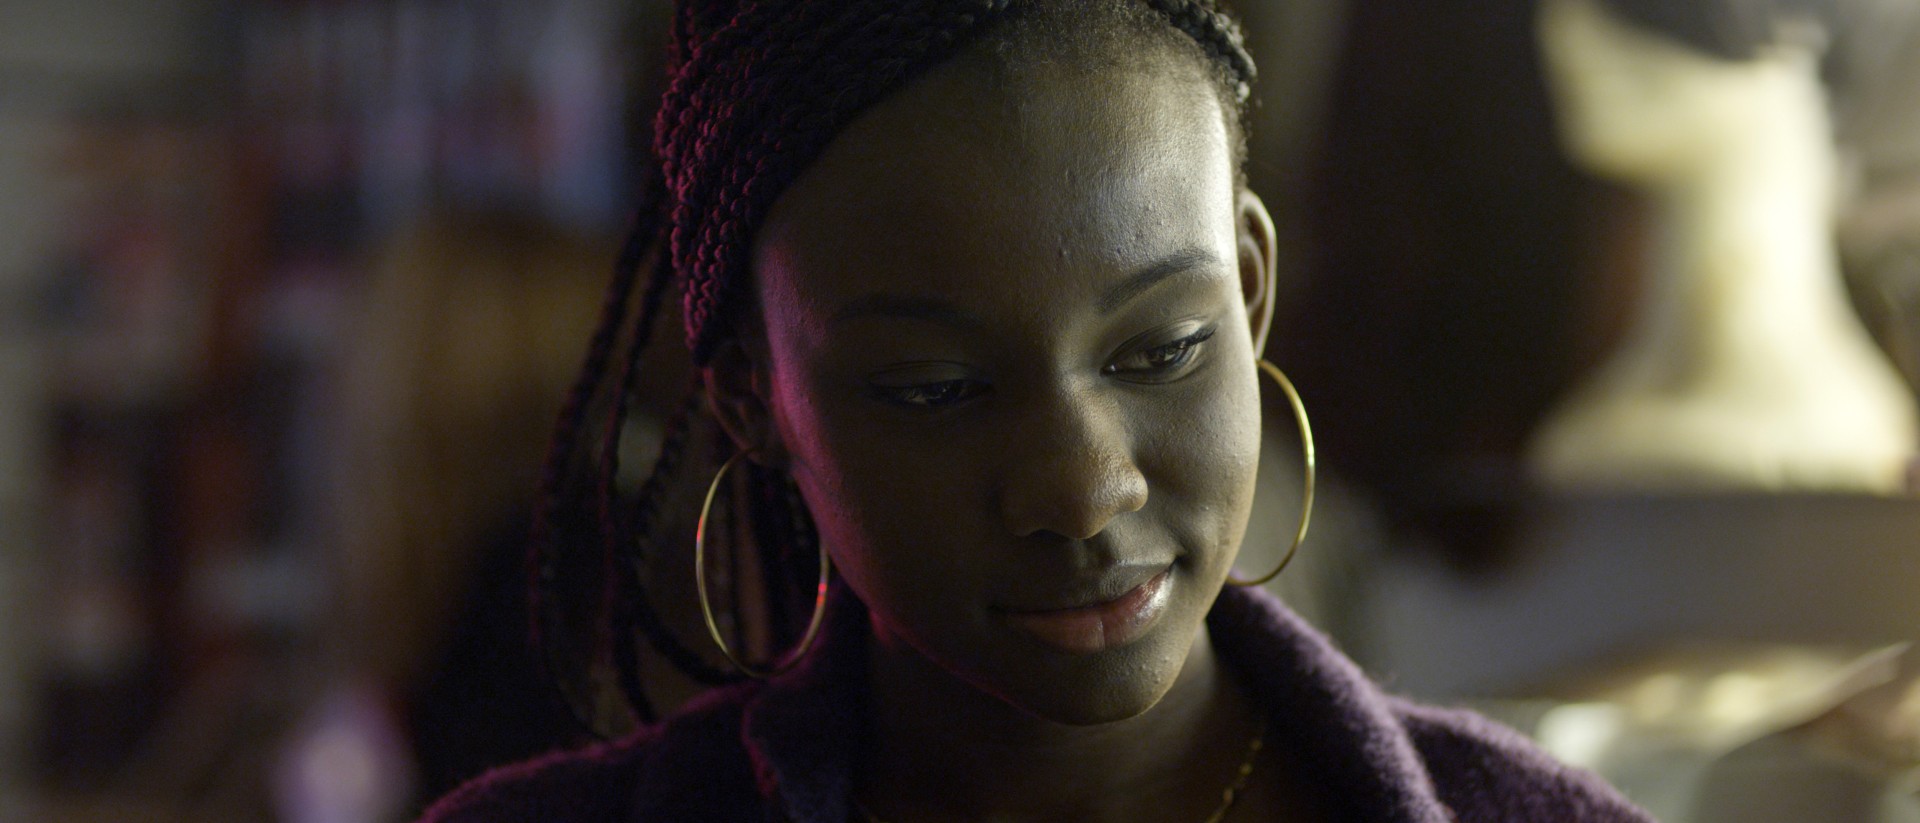 A still from the film UNIVITELLIN by Terence Nance shows a Black person's face in close-up, they are almost smiling and wearing large gold hoop earrings - looking down.